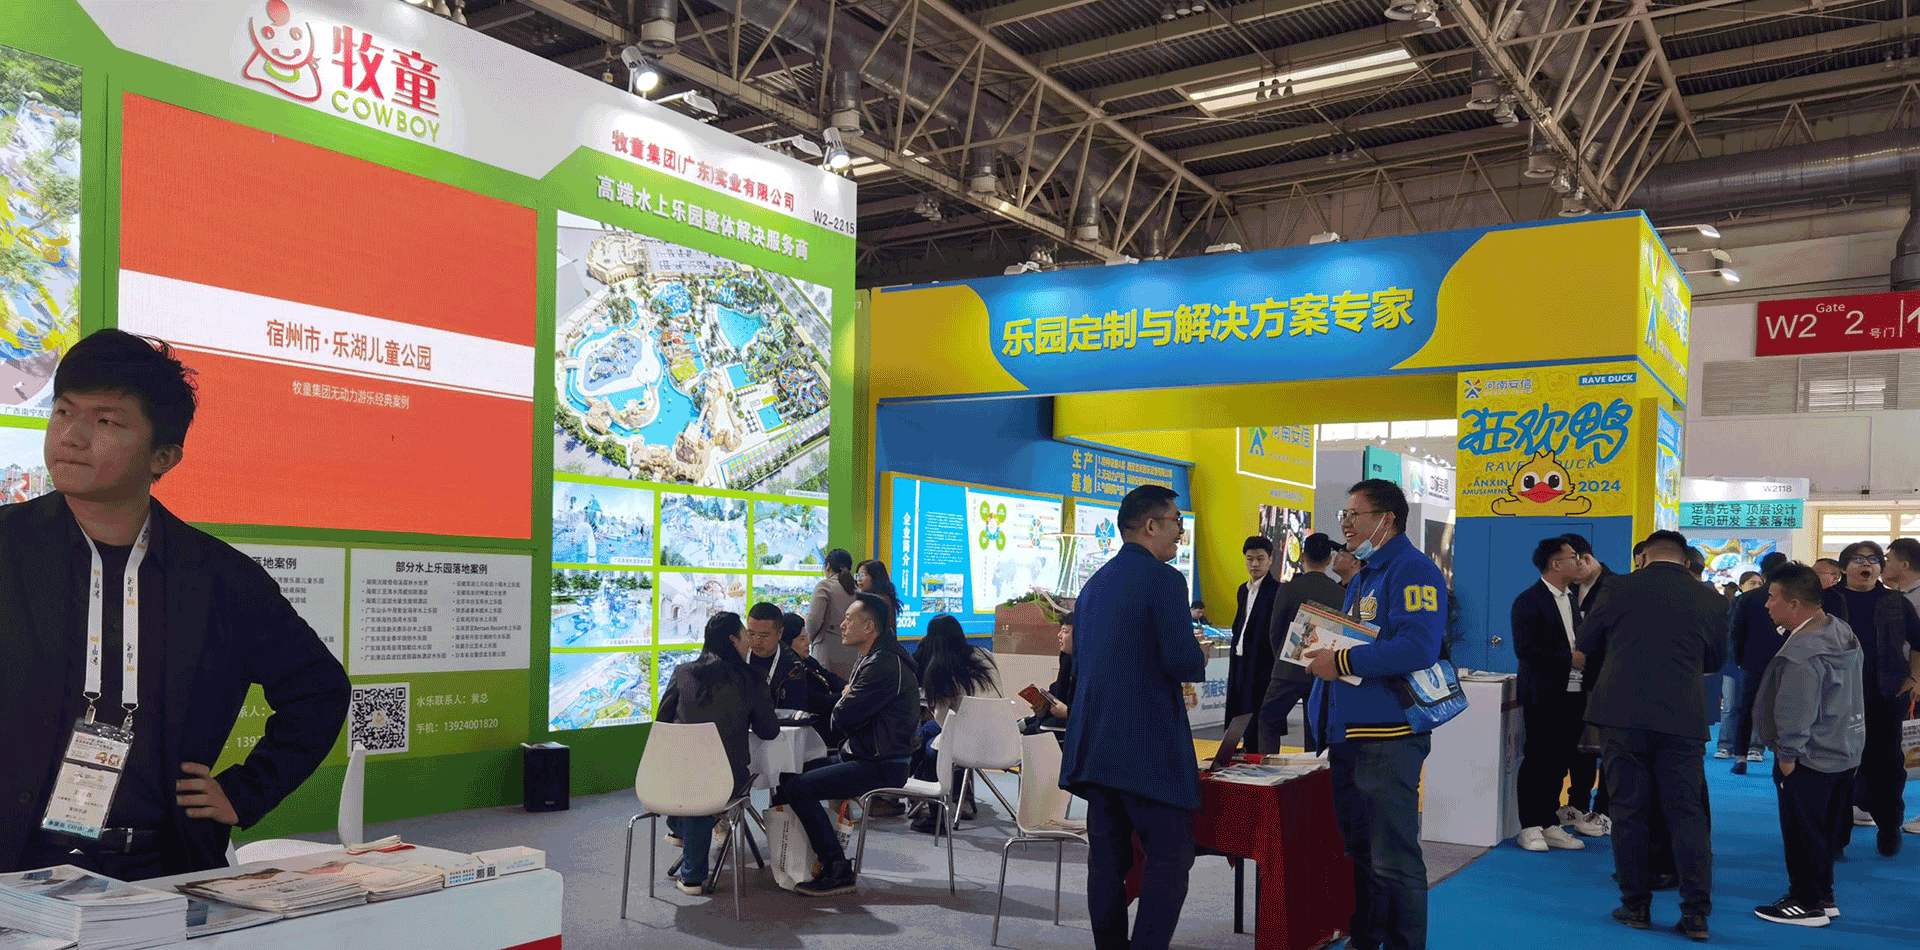 Cowboy Group Gained Great Success at the China Beijing Attraction Expo 2024, Assisting Cowboy Group to Further Enter the International Market